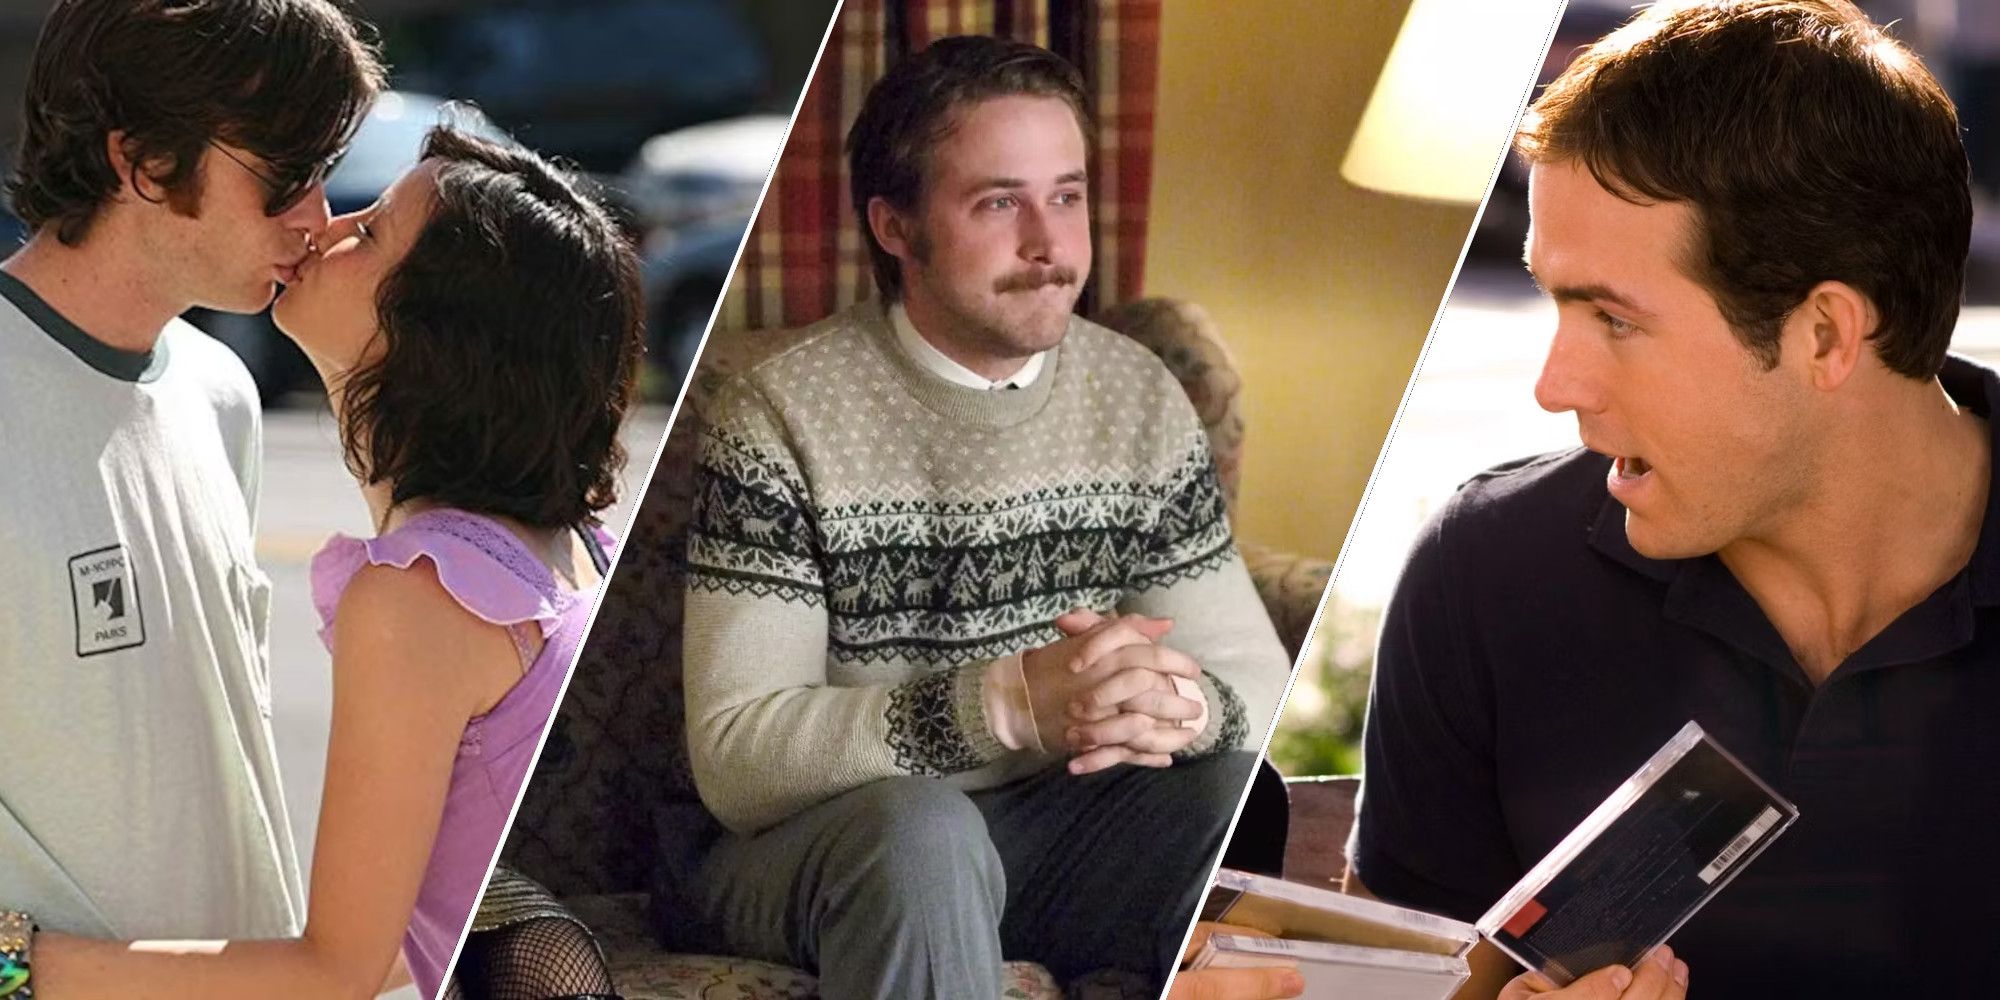 A collage of underrated romantic comedies from the 2000s, featuring stills from Watching the Detectives, Lars and the Real Girl, and Maybe, Definitely